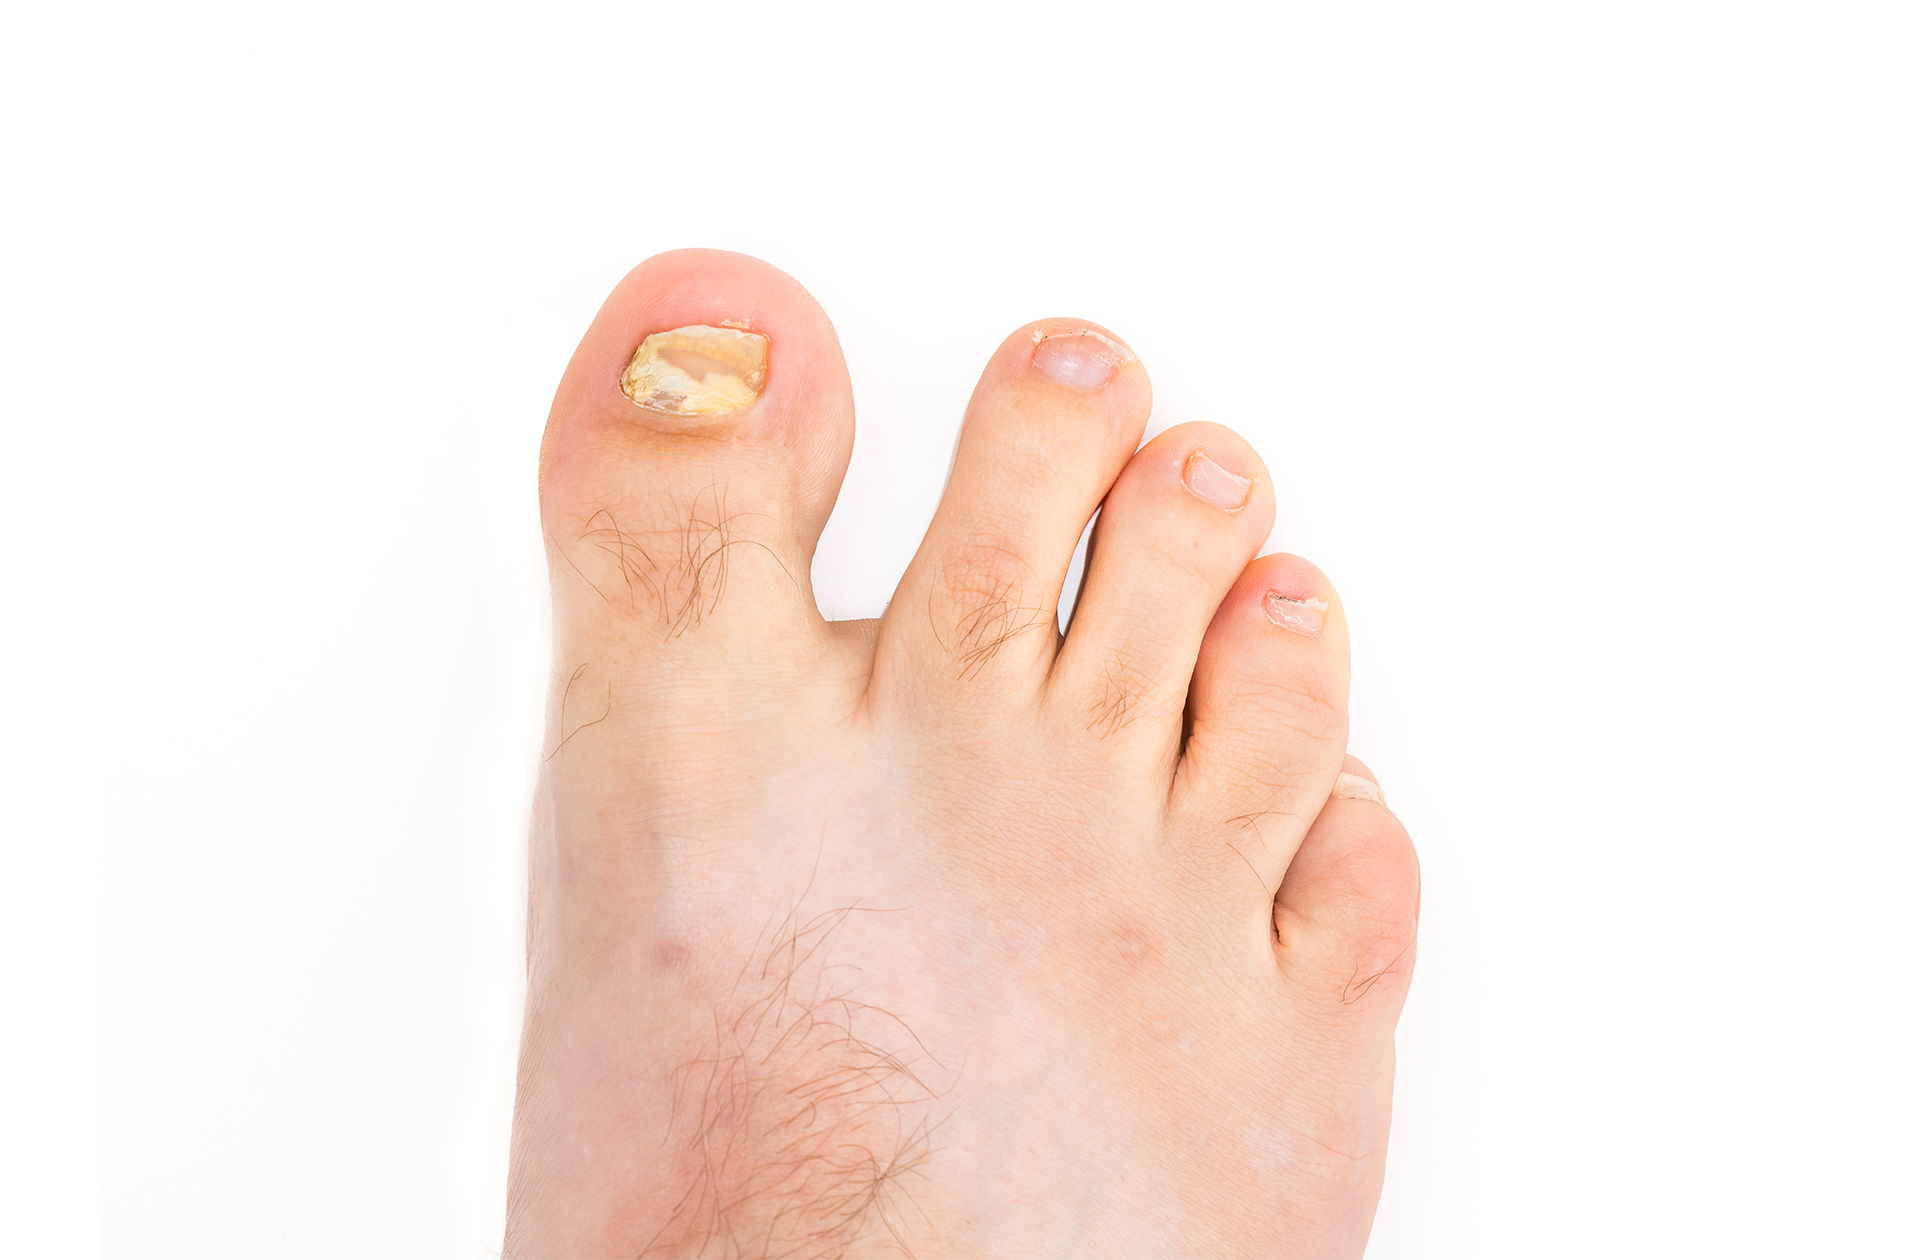 Thickened Toenails - Why Do I Have Them? - The Healthcare Hub